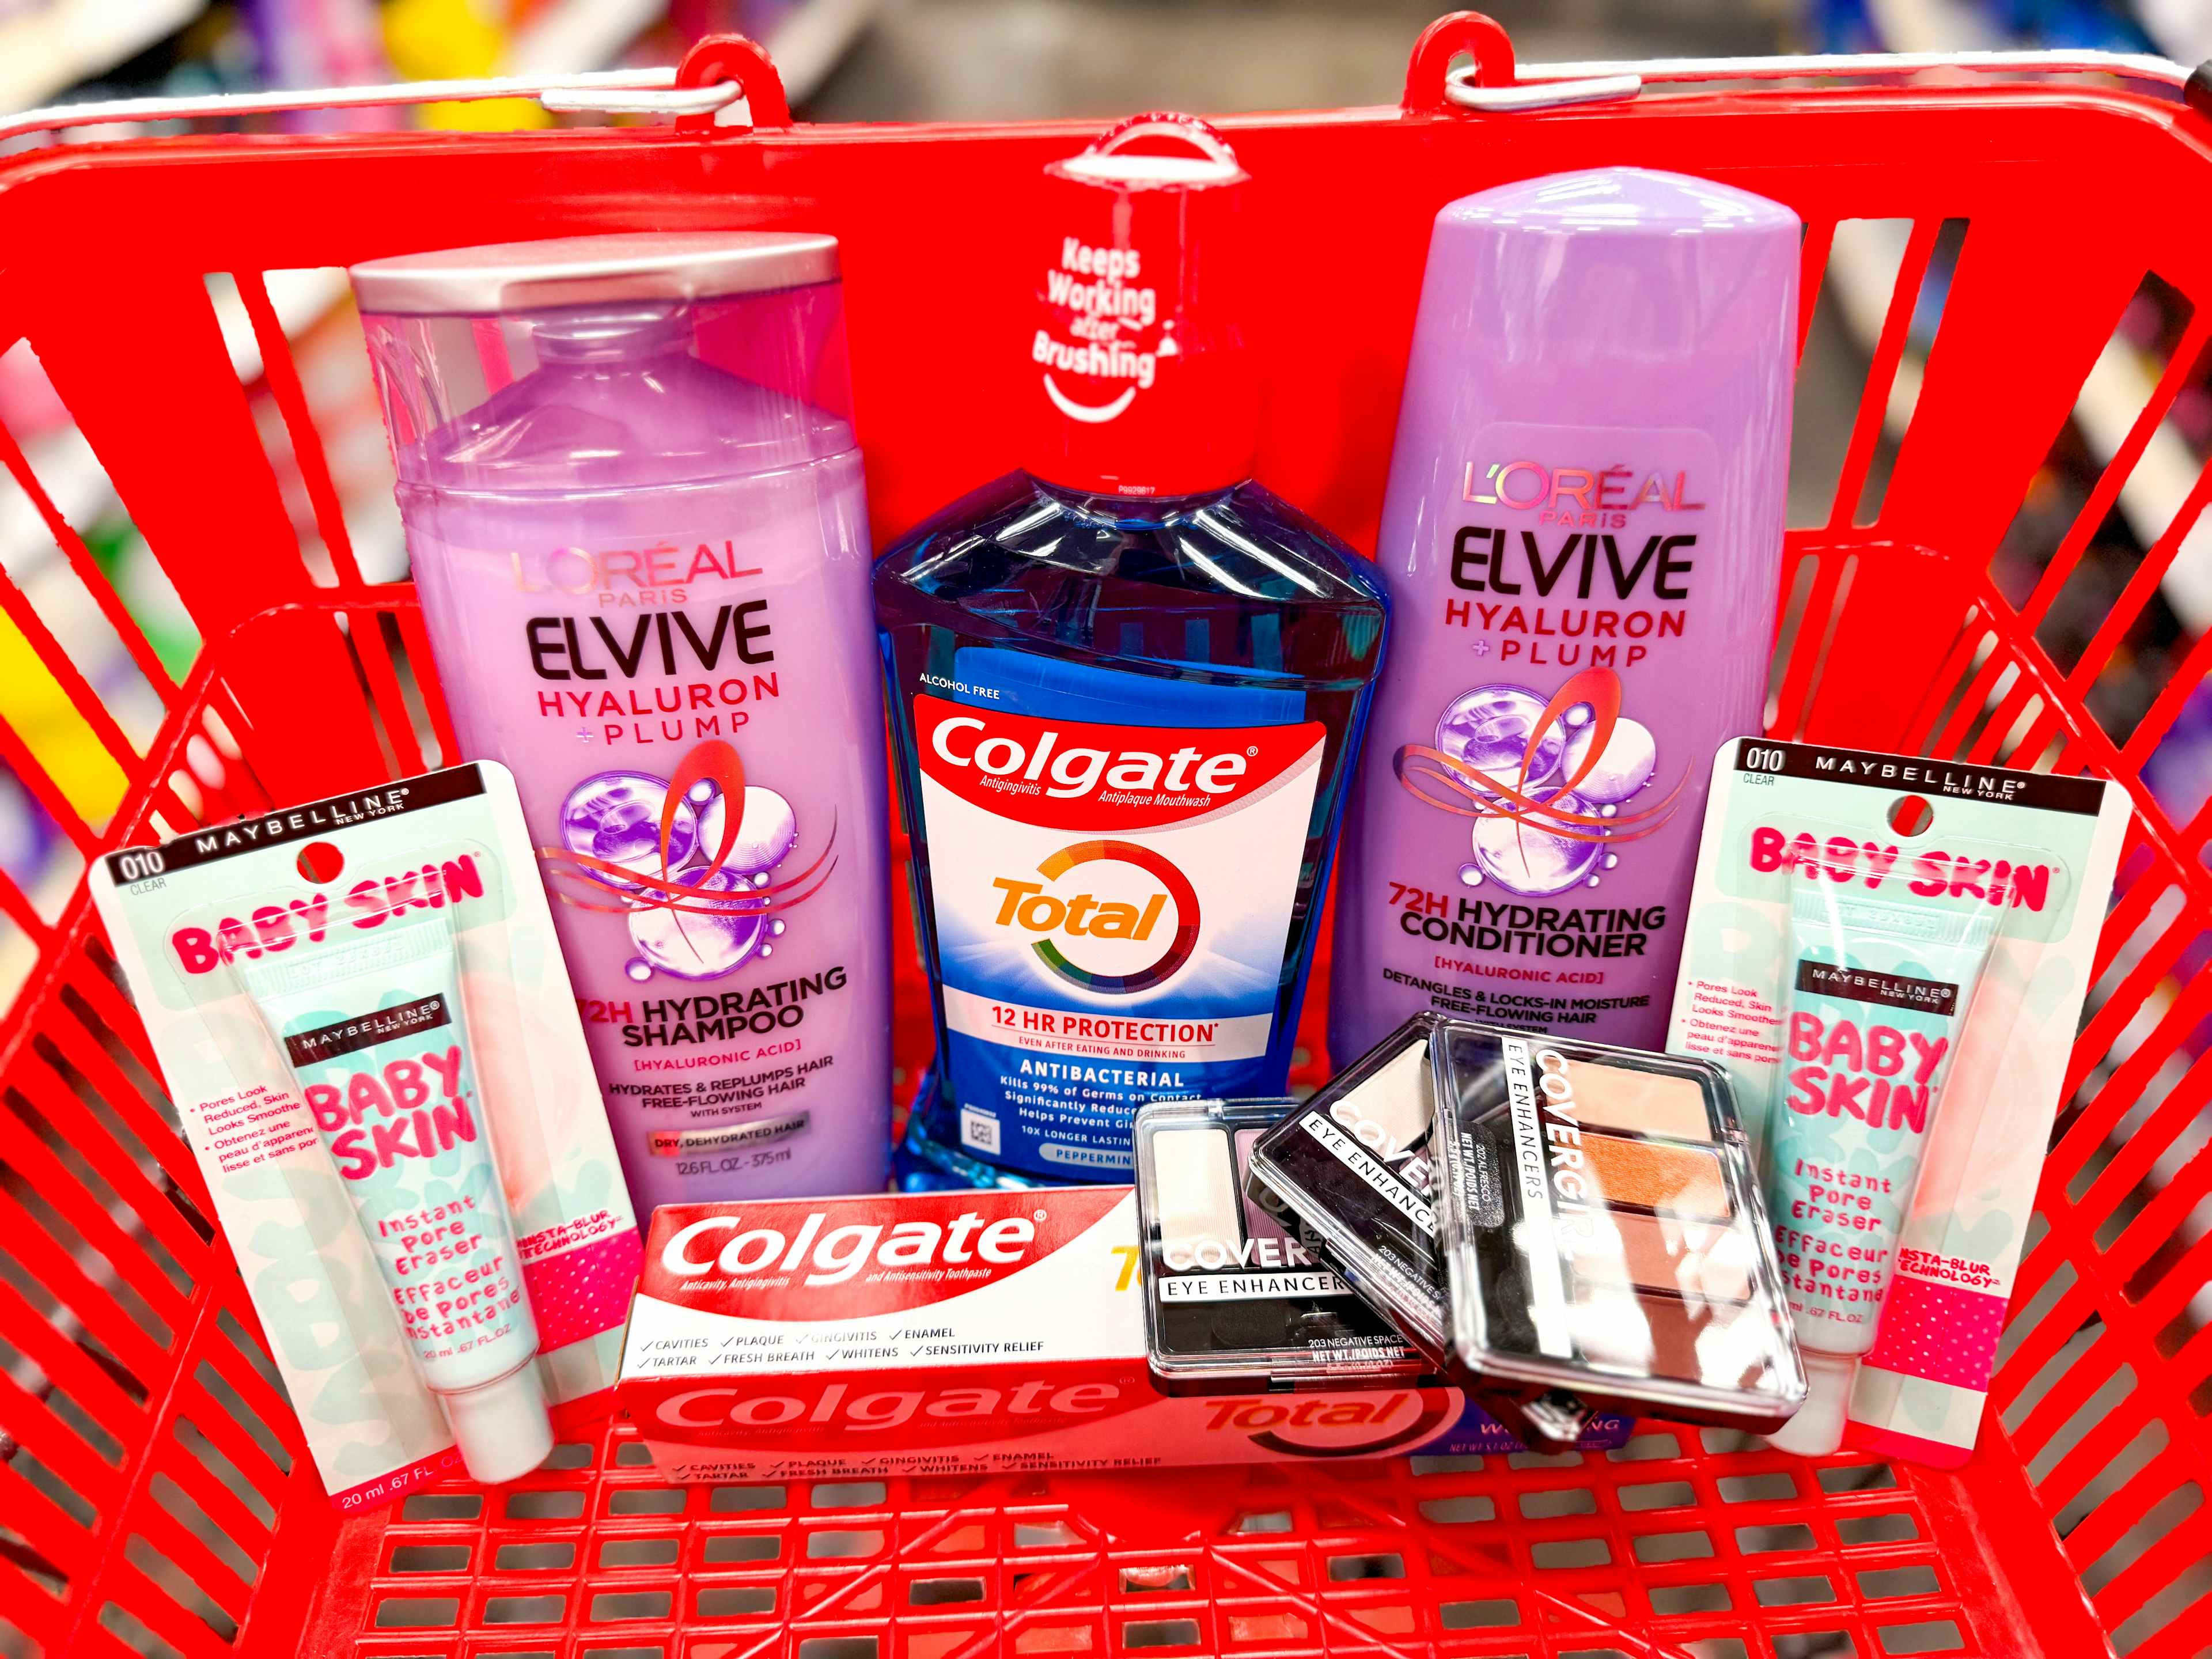 shopping basket with products including: L'Oreal Elvive, Maybelline, Colgate and Covergirl